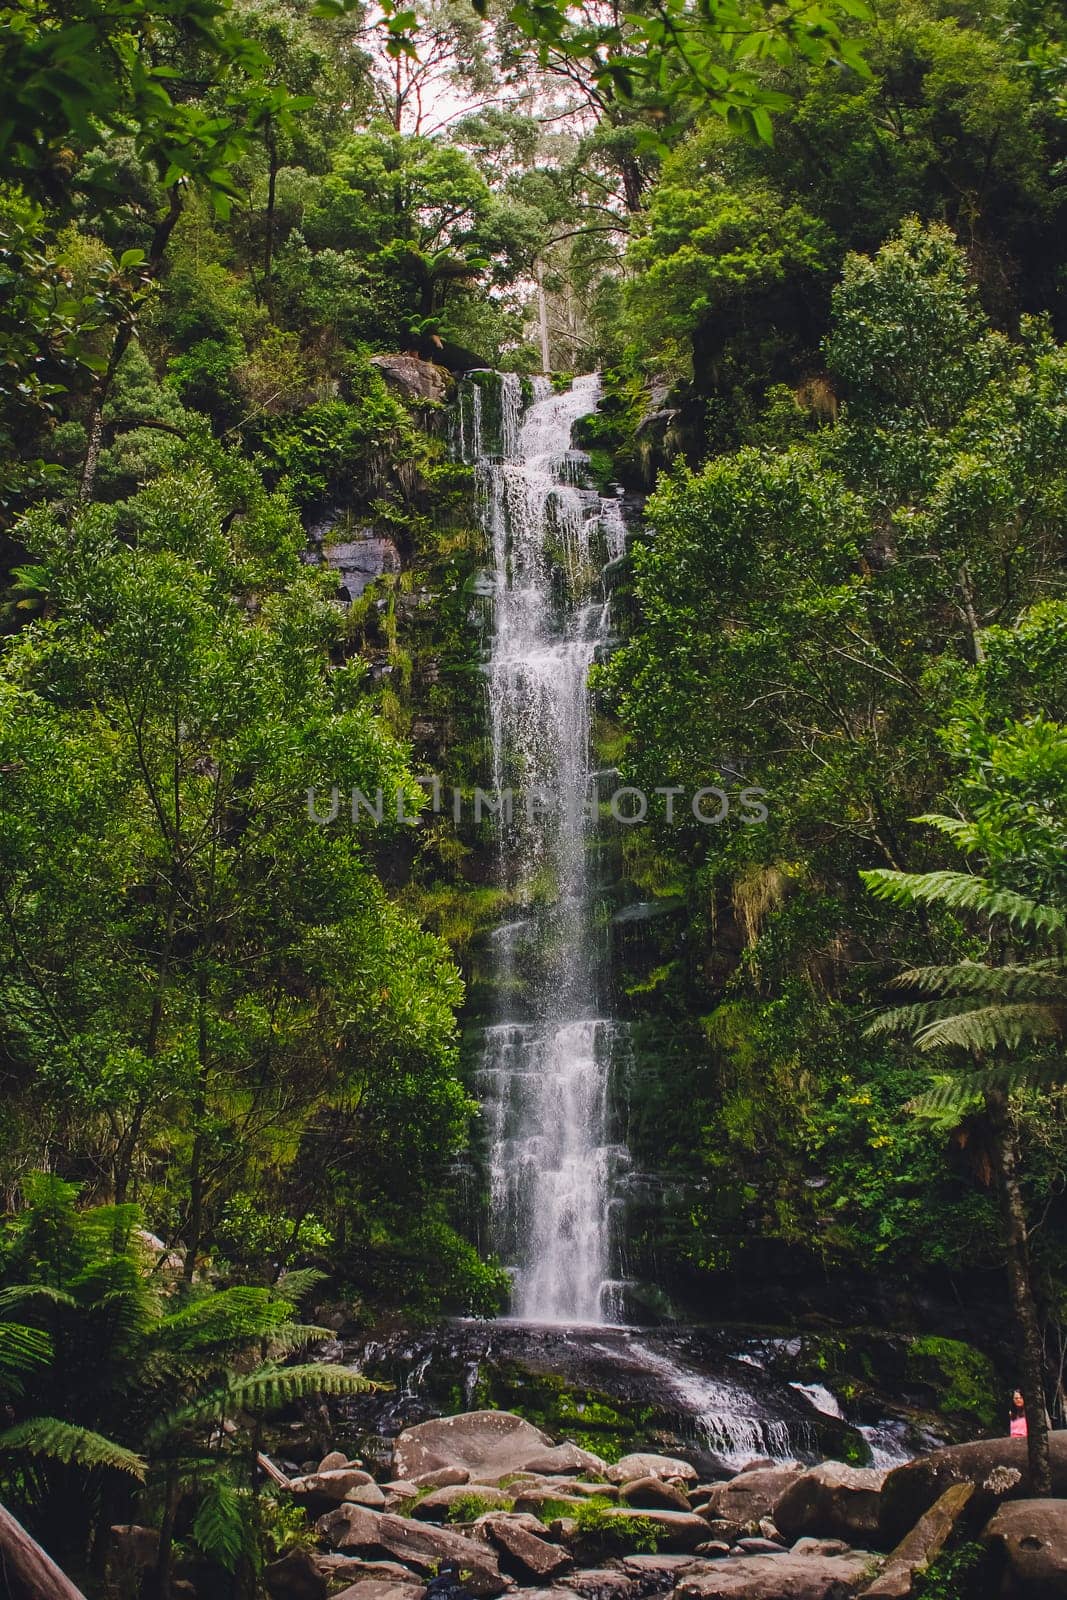 Waterfall in a lush rainforest. Great Otway National Park in Victoria, Australia by mmp1206